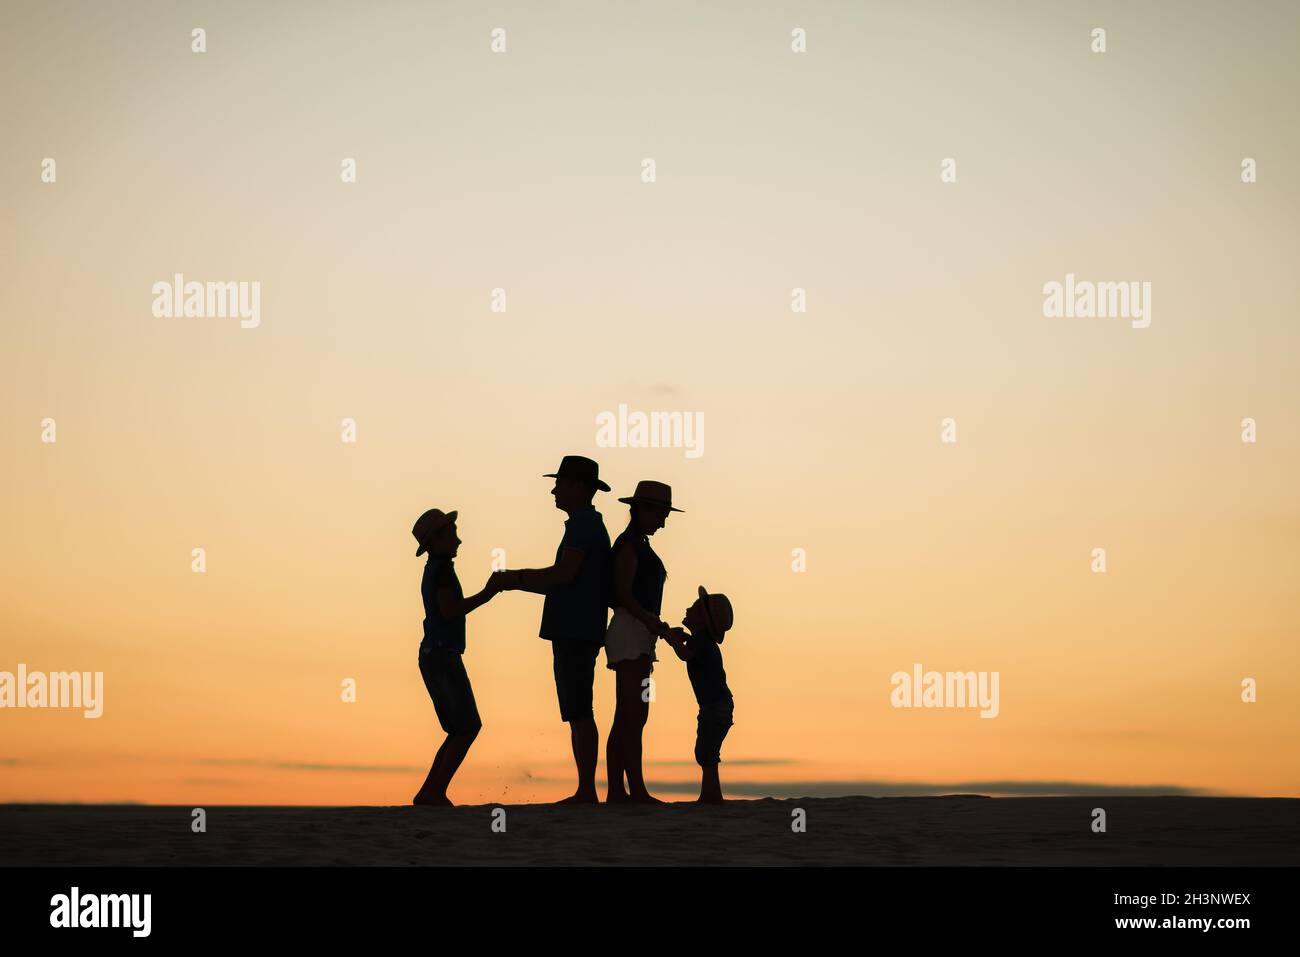 Silhouette of a family at sunset on the Sands. Mom and dad stand with their backs to each other and hold hands with their sons. Stock Photo